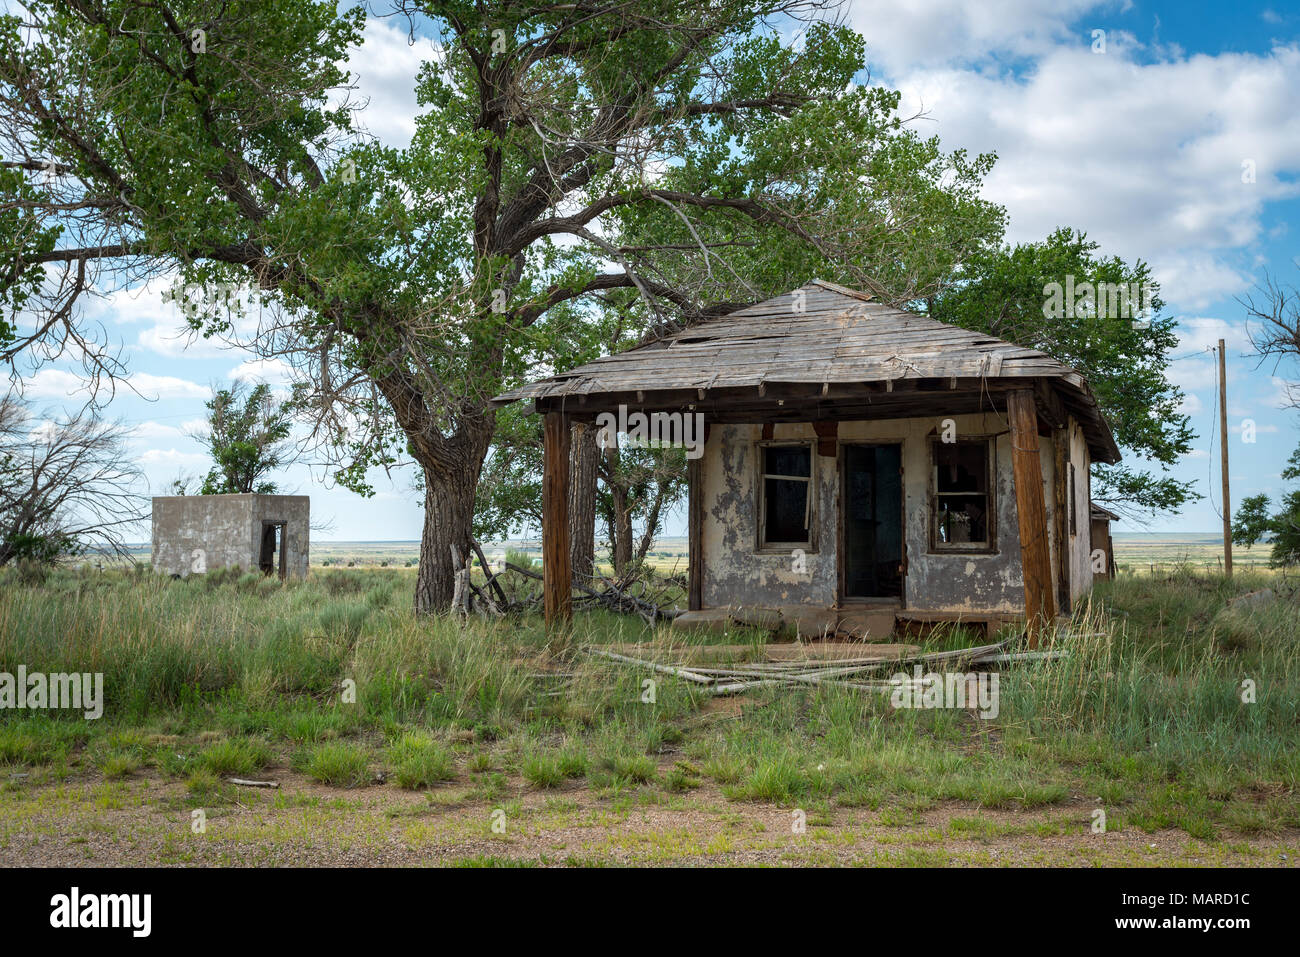 Abandoned small house/ruin in rural area. Desert in the background. Stock Photo